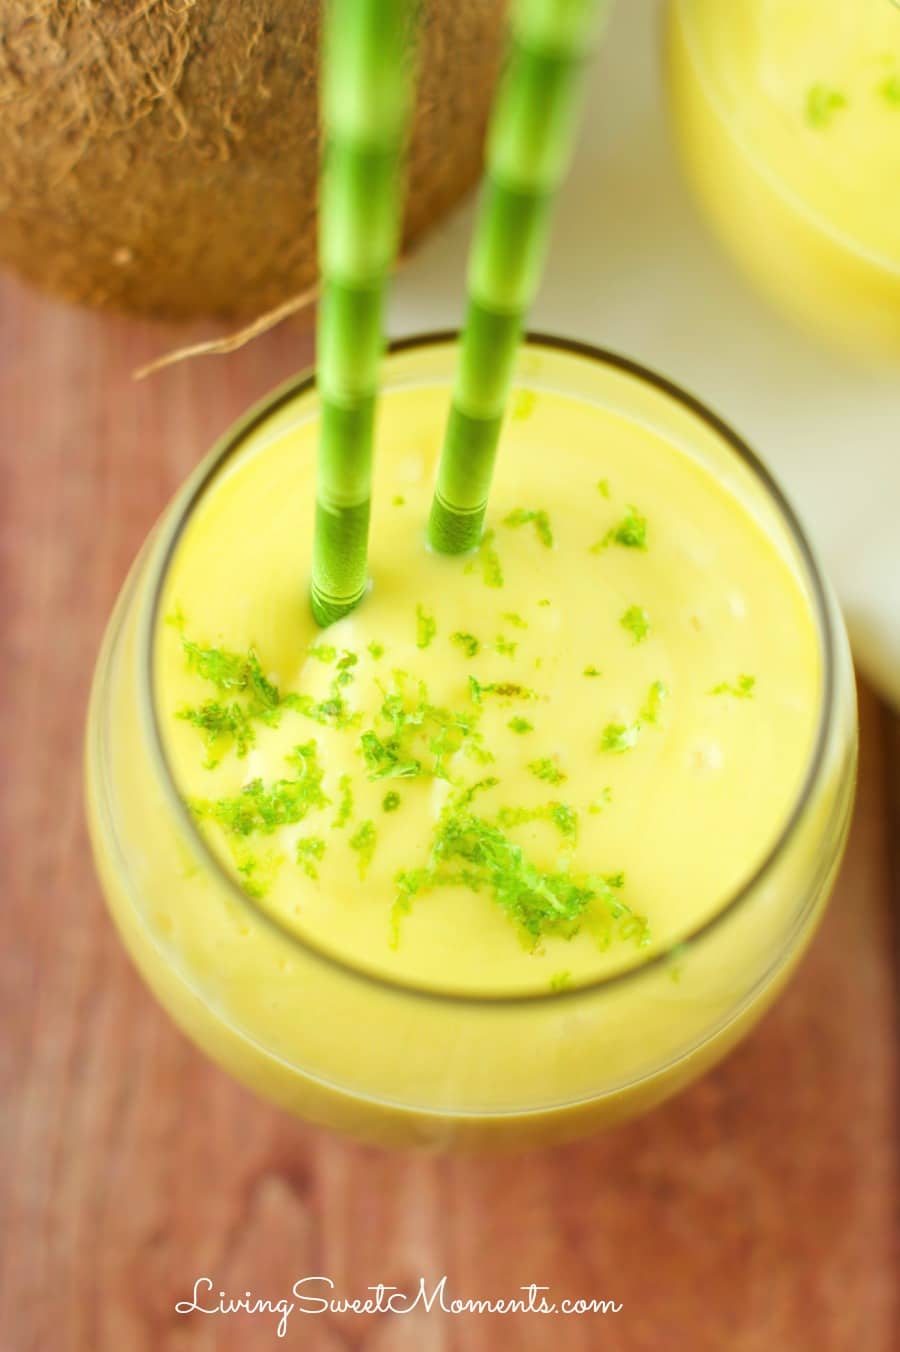 Mango Coconut Smoothie - Delicious 3 ingredient smoothie. Enjoy tropical flavors in a decadent thick smoothie that takes just seconds to make. Perfect breakfast or afternoon snack.